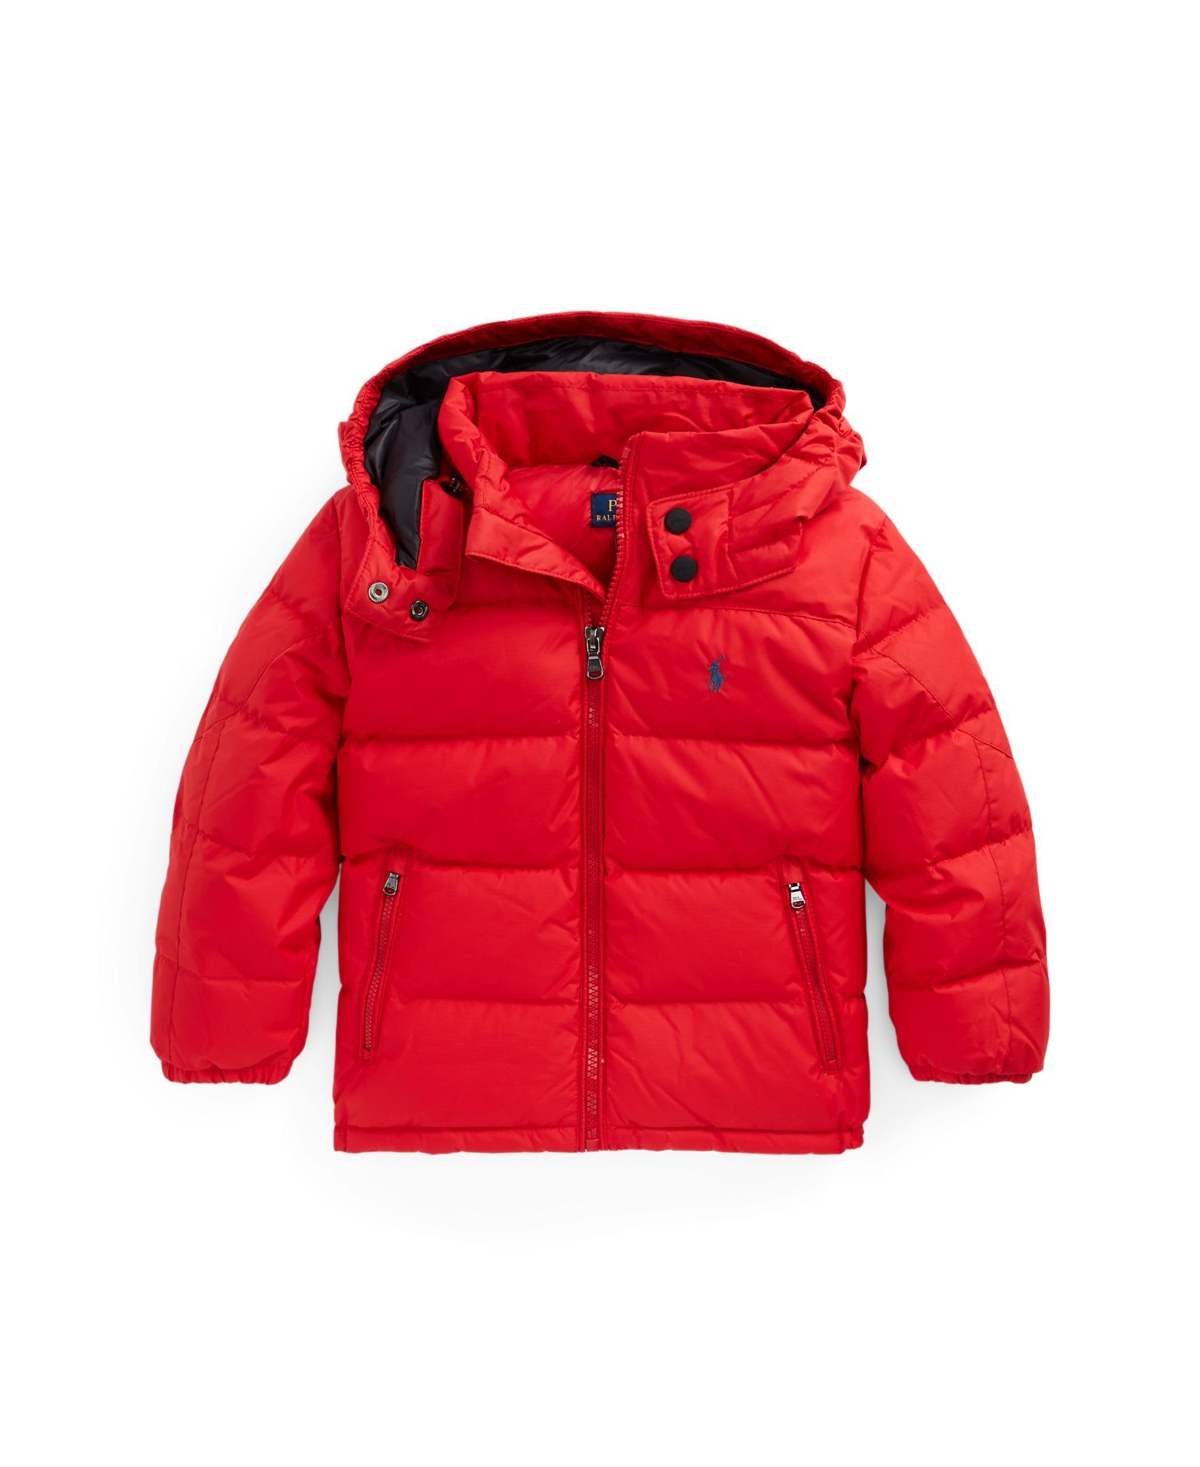 Polo Ralph Lauren Babies' Little And Toddler Boys Water-resistant Down Jacket In Red